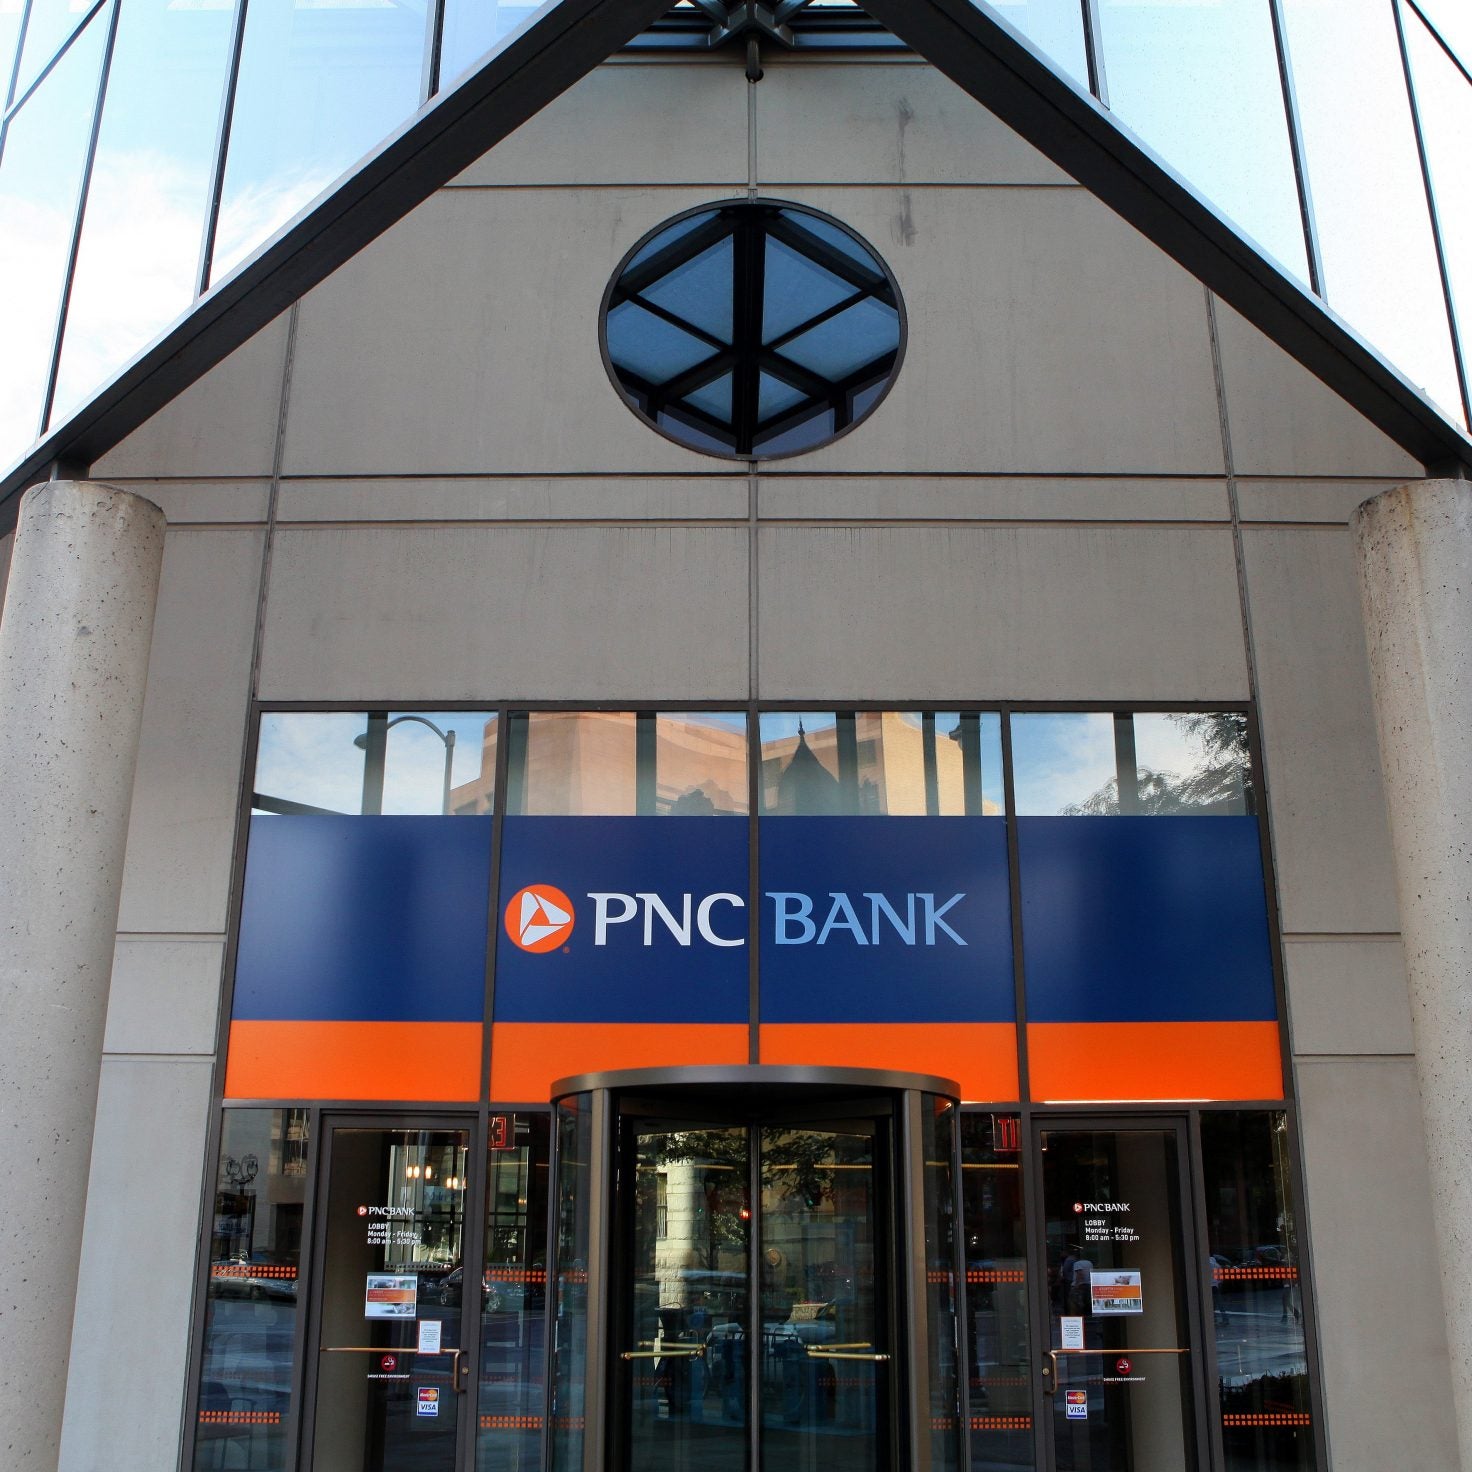 Former PNC Employee Awarded $2.4 Million Settlement After Bank Failed To Protect Her From White Male Customer